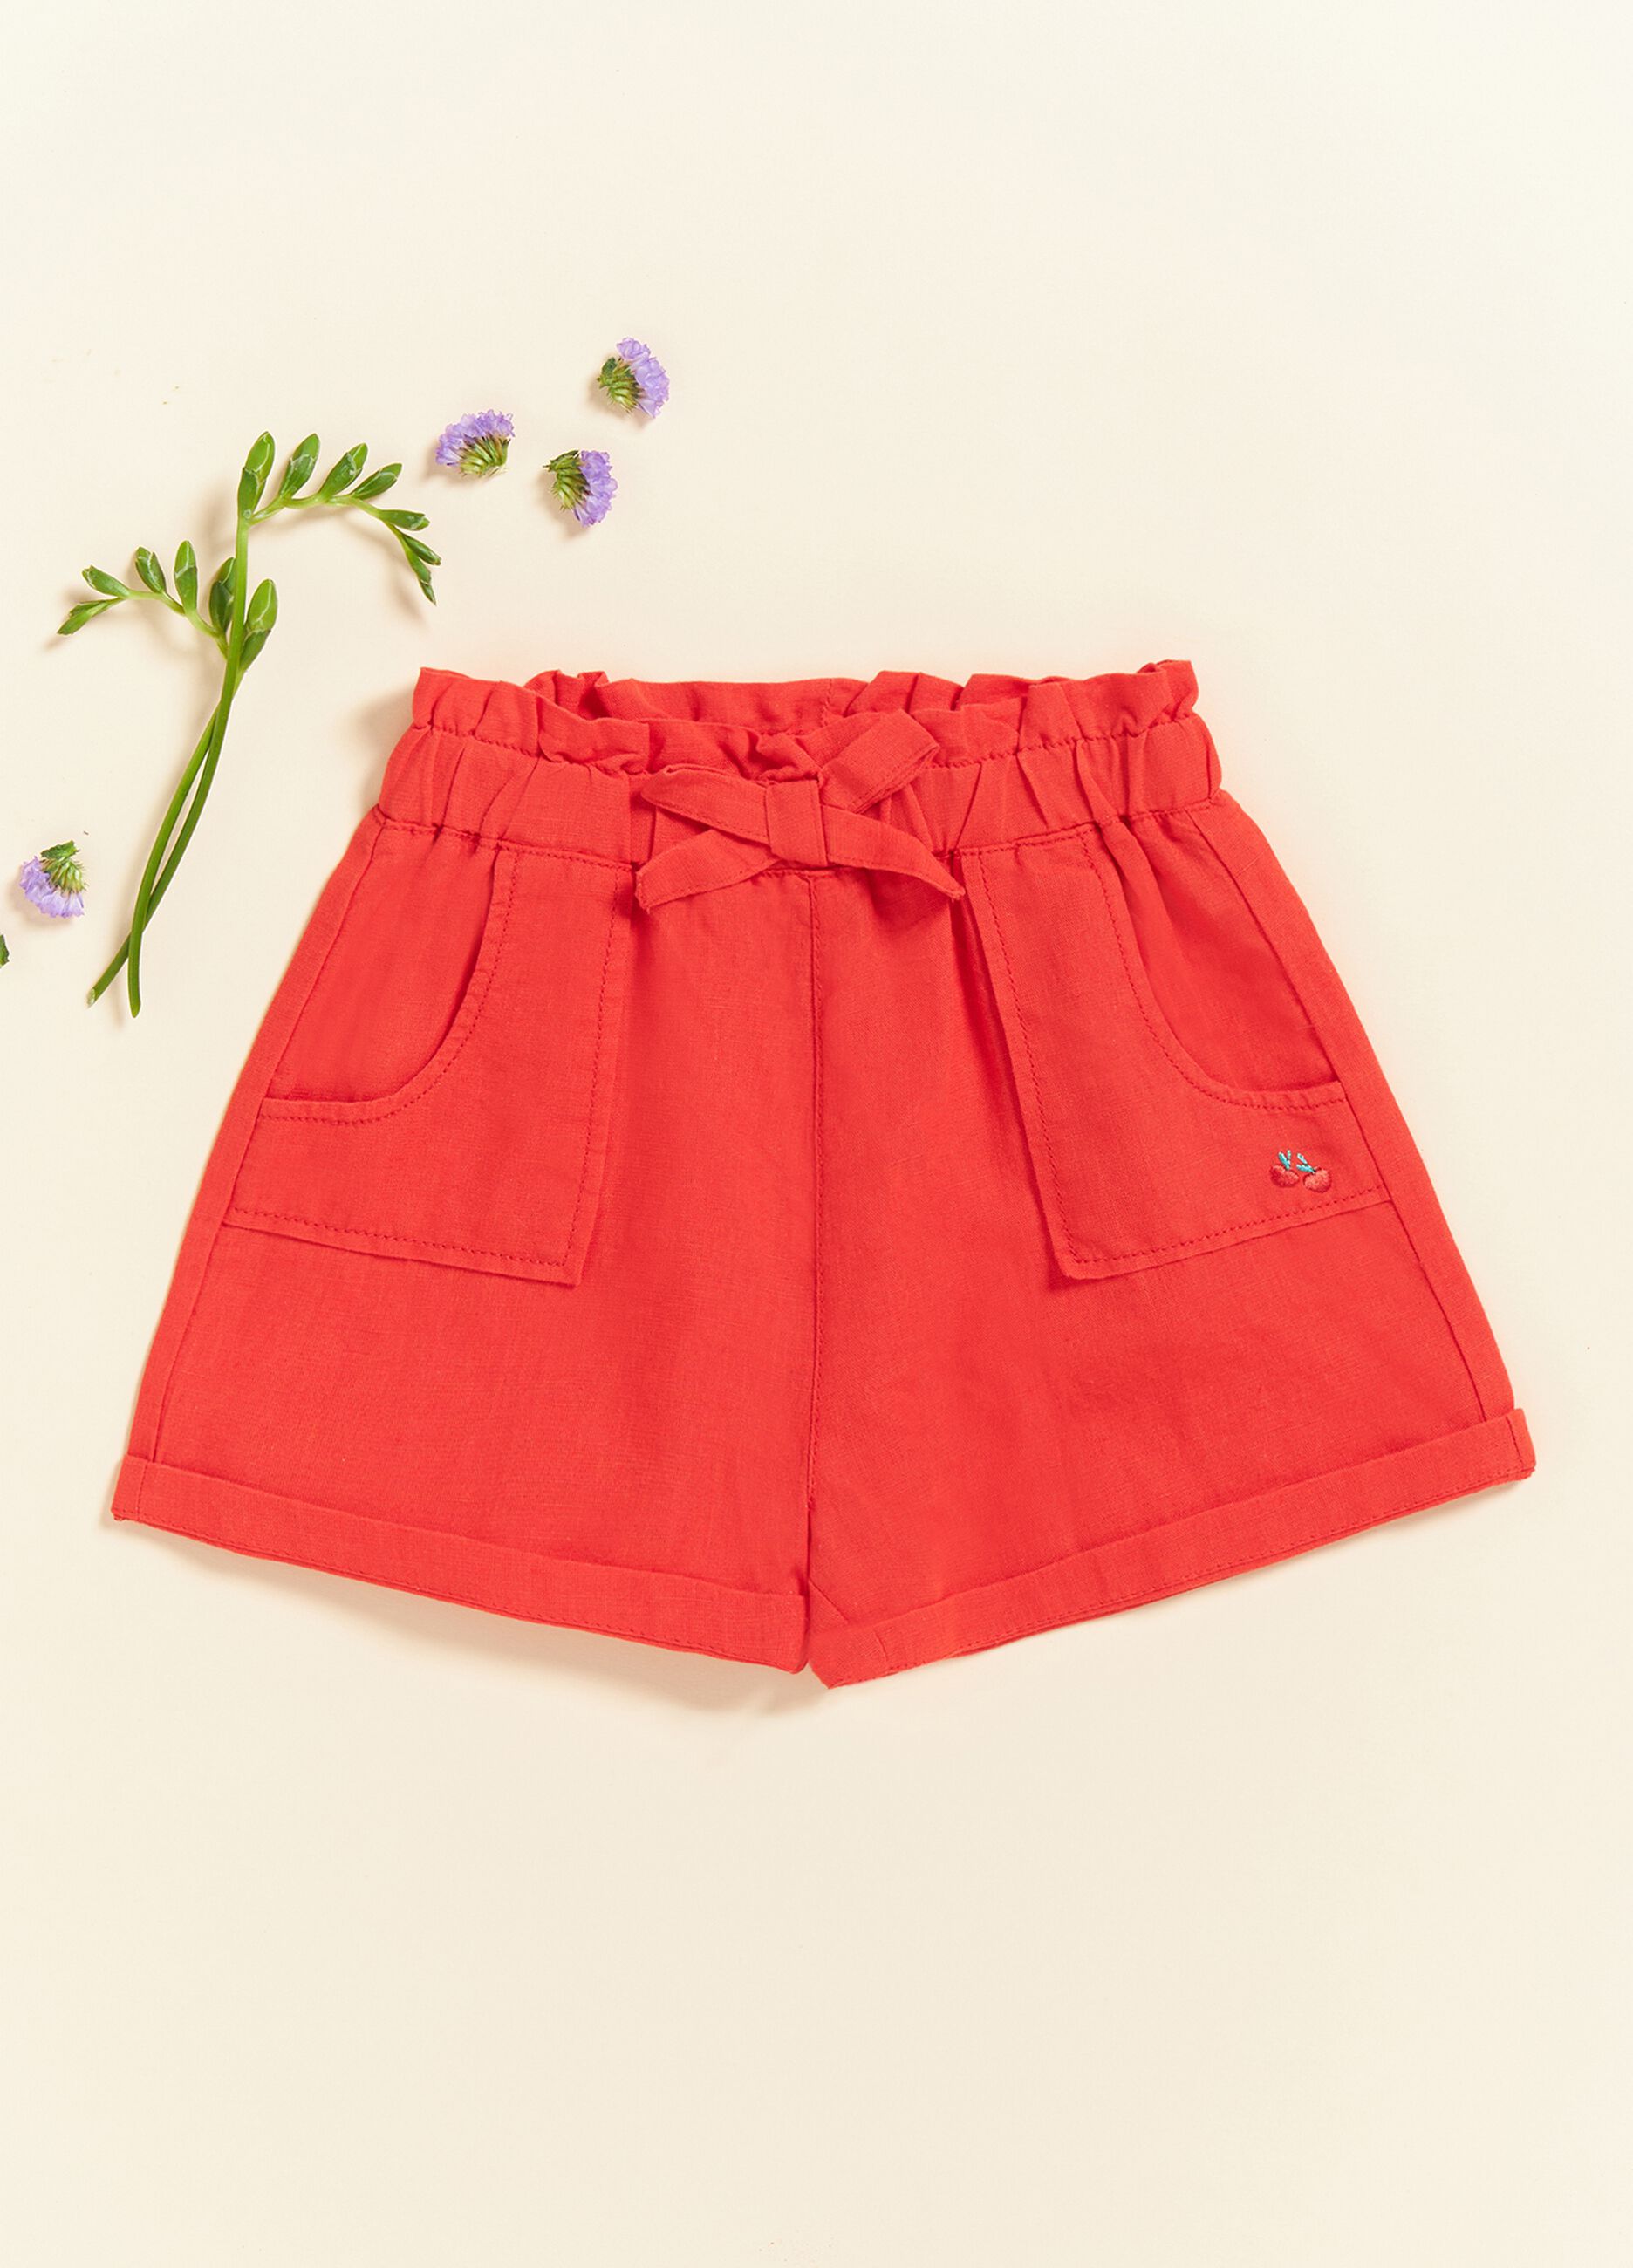 IANA shorts In linen blend with bow